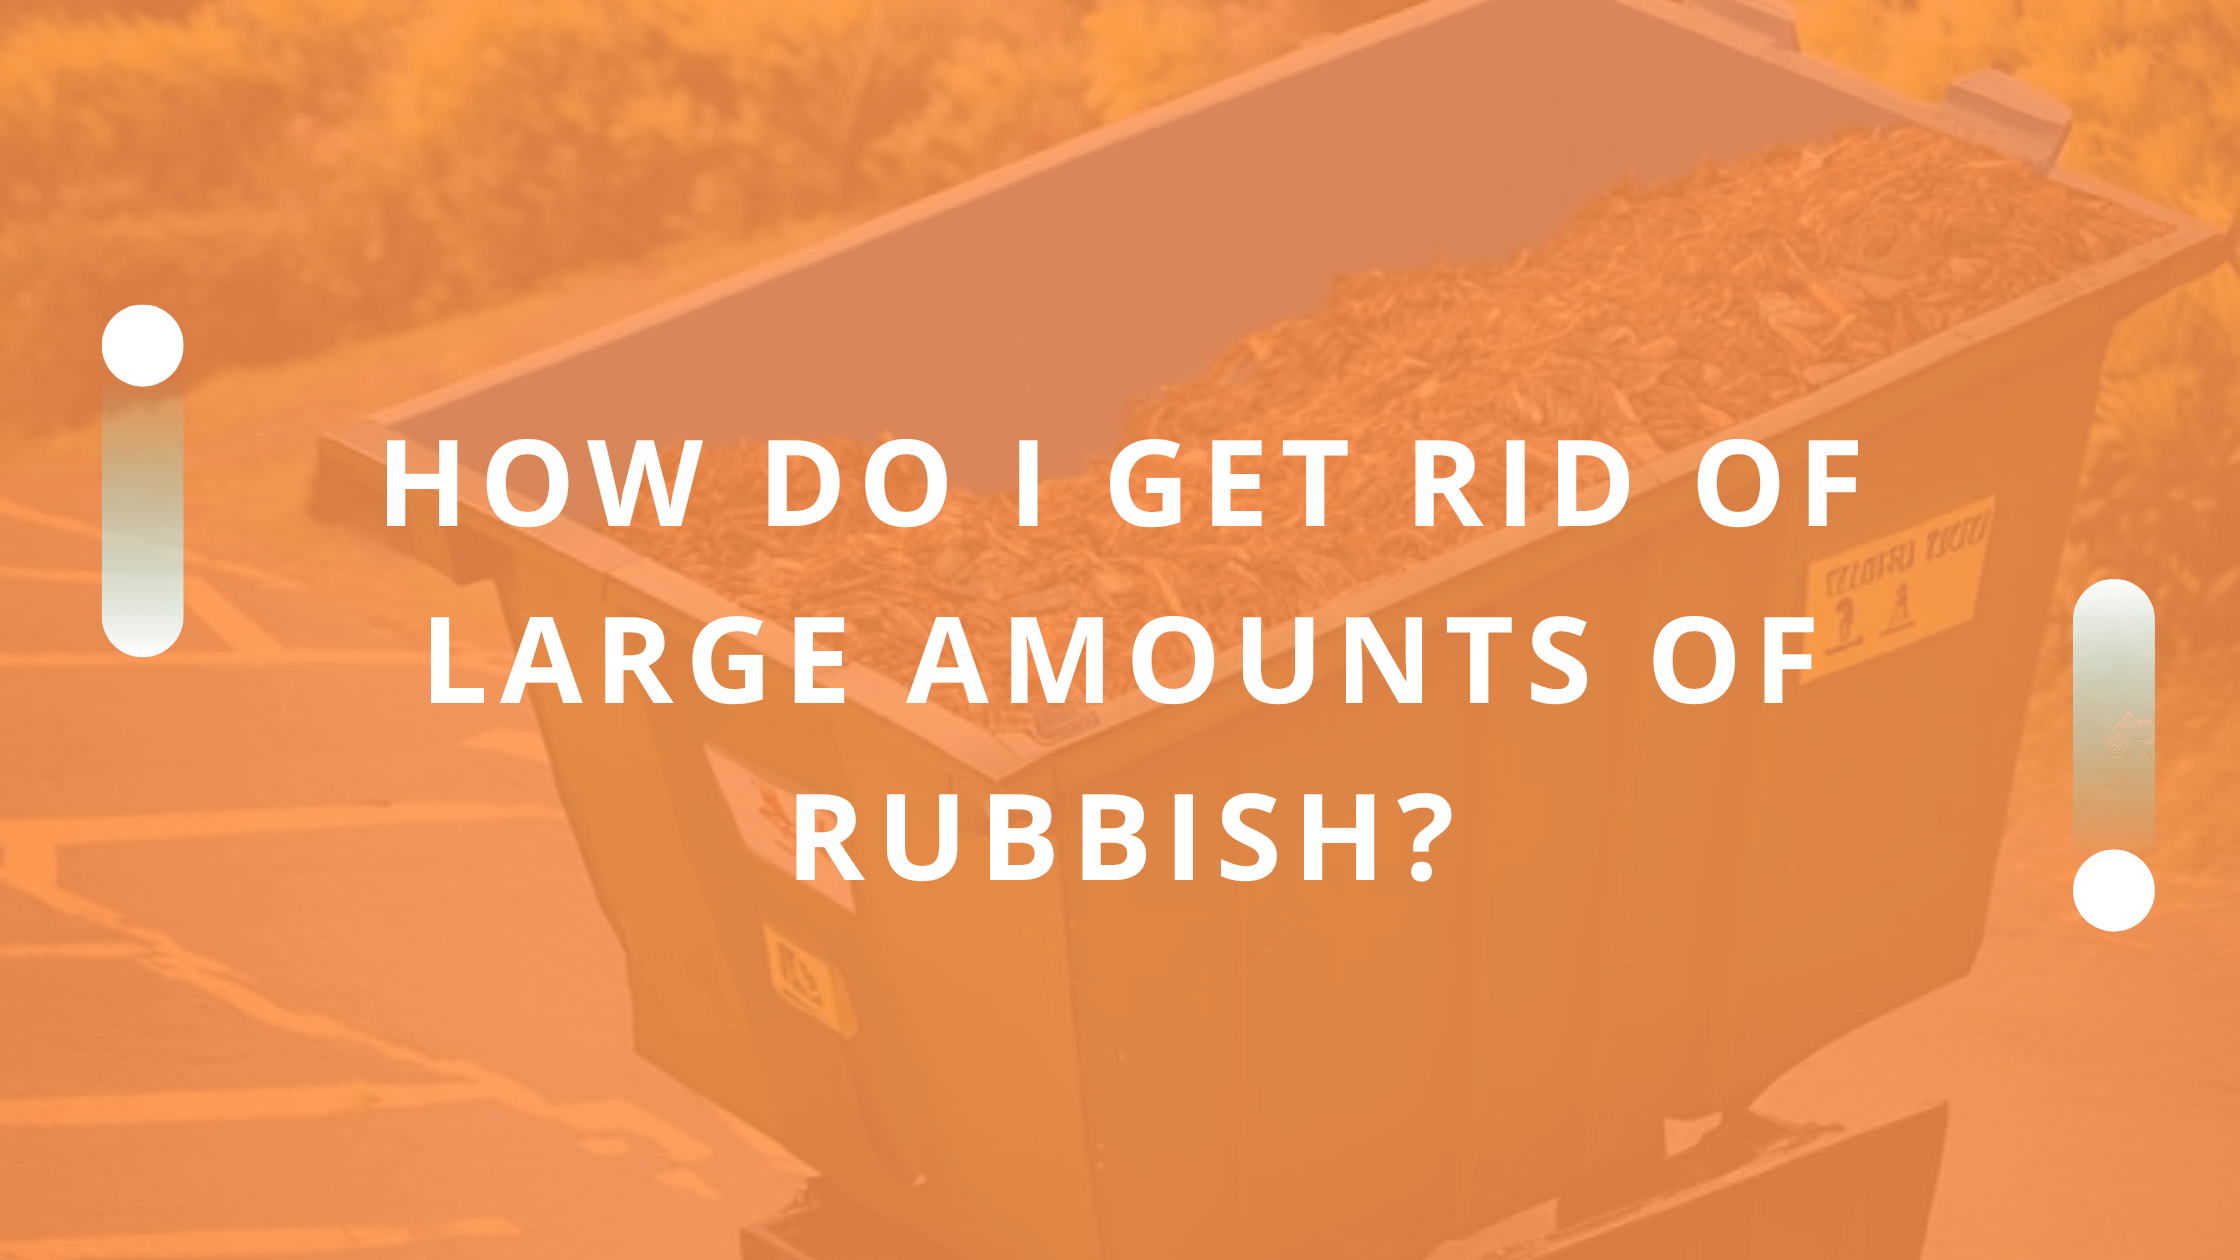 How to get rid of large amount of rubbish?